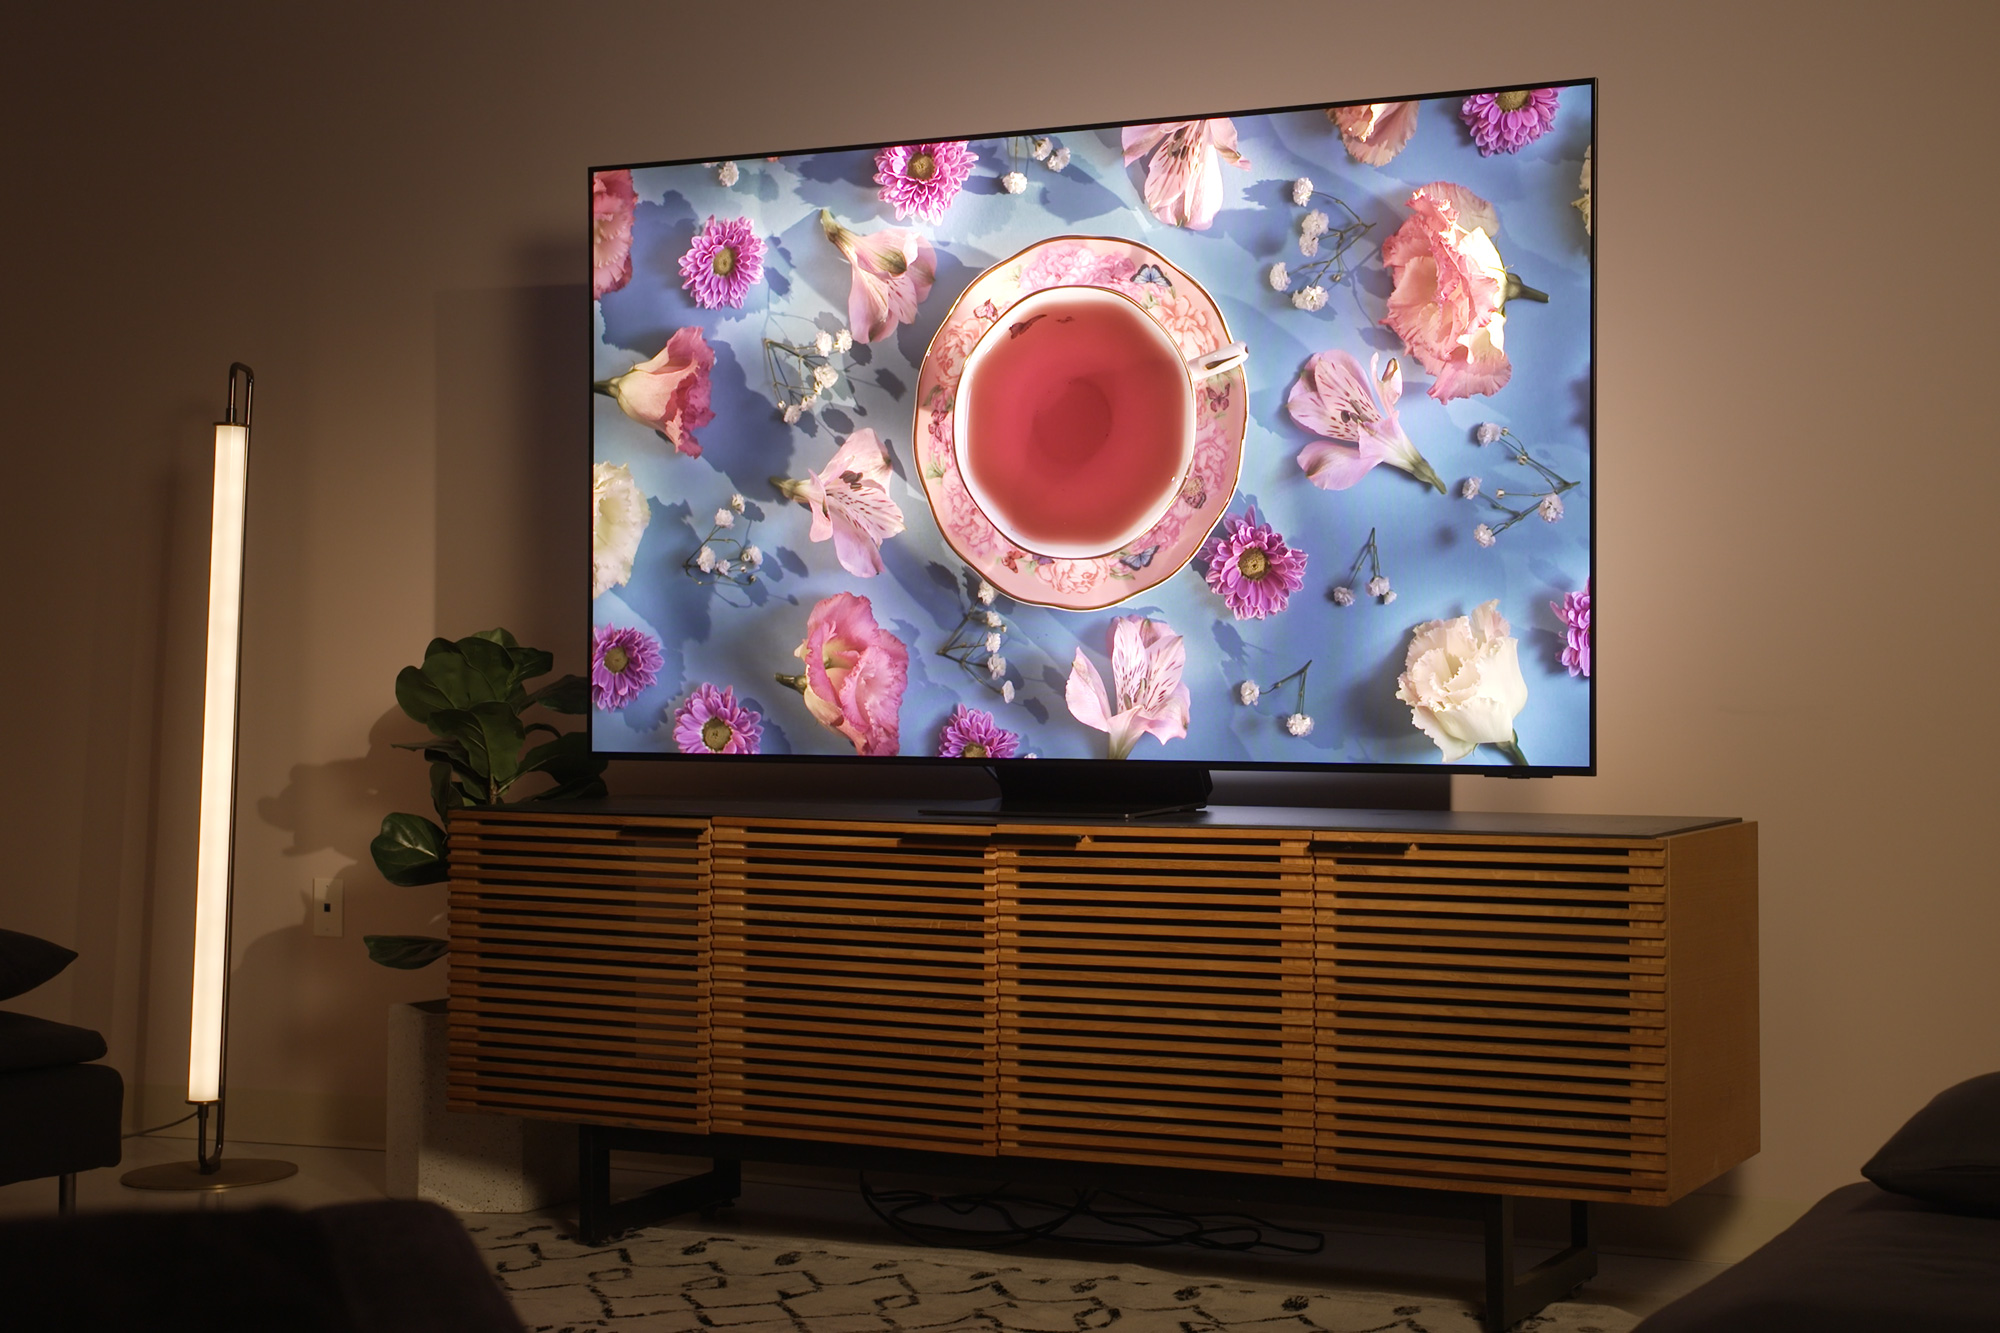 Score Our Favorite High-End OLED TV in Time for the Big Game With $700 in  Savings - CNET